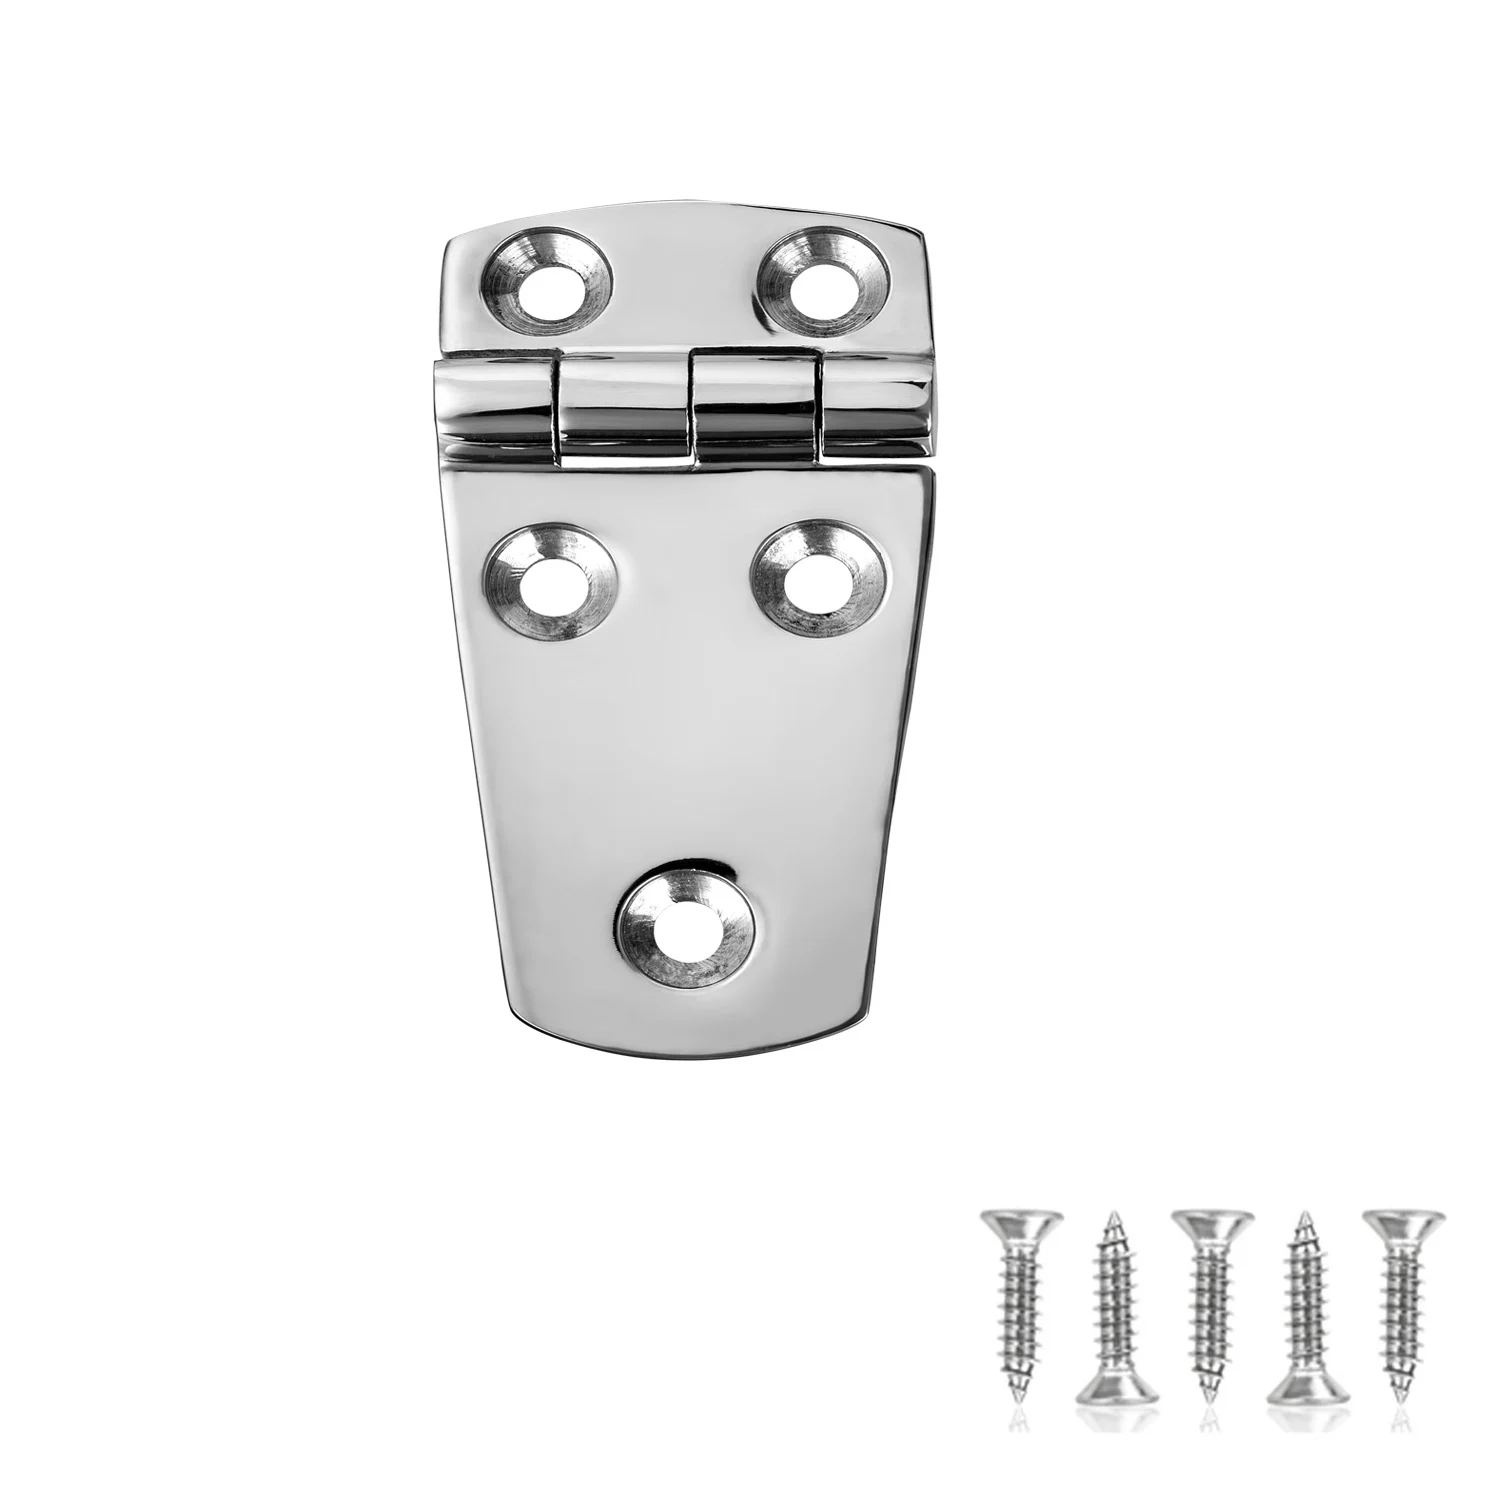 Marine Boat Hatch Hinges Stainless Steel, 3 Inch X 1.5 Inches(76 X 38MM) 5 Holes, No Noise, Heavy Duty 316 Ss with Screws 4x metal locking folding table chair leg brackets spring cabinet hinges cupboard door furniture hardware with screws no drilling